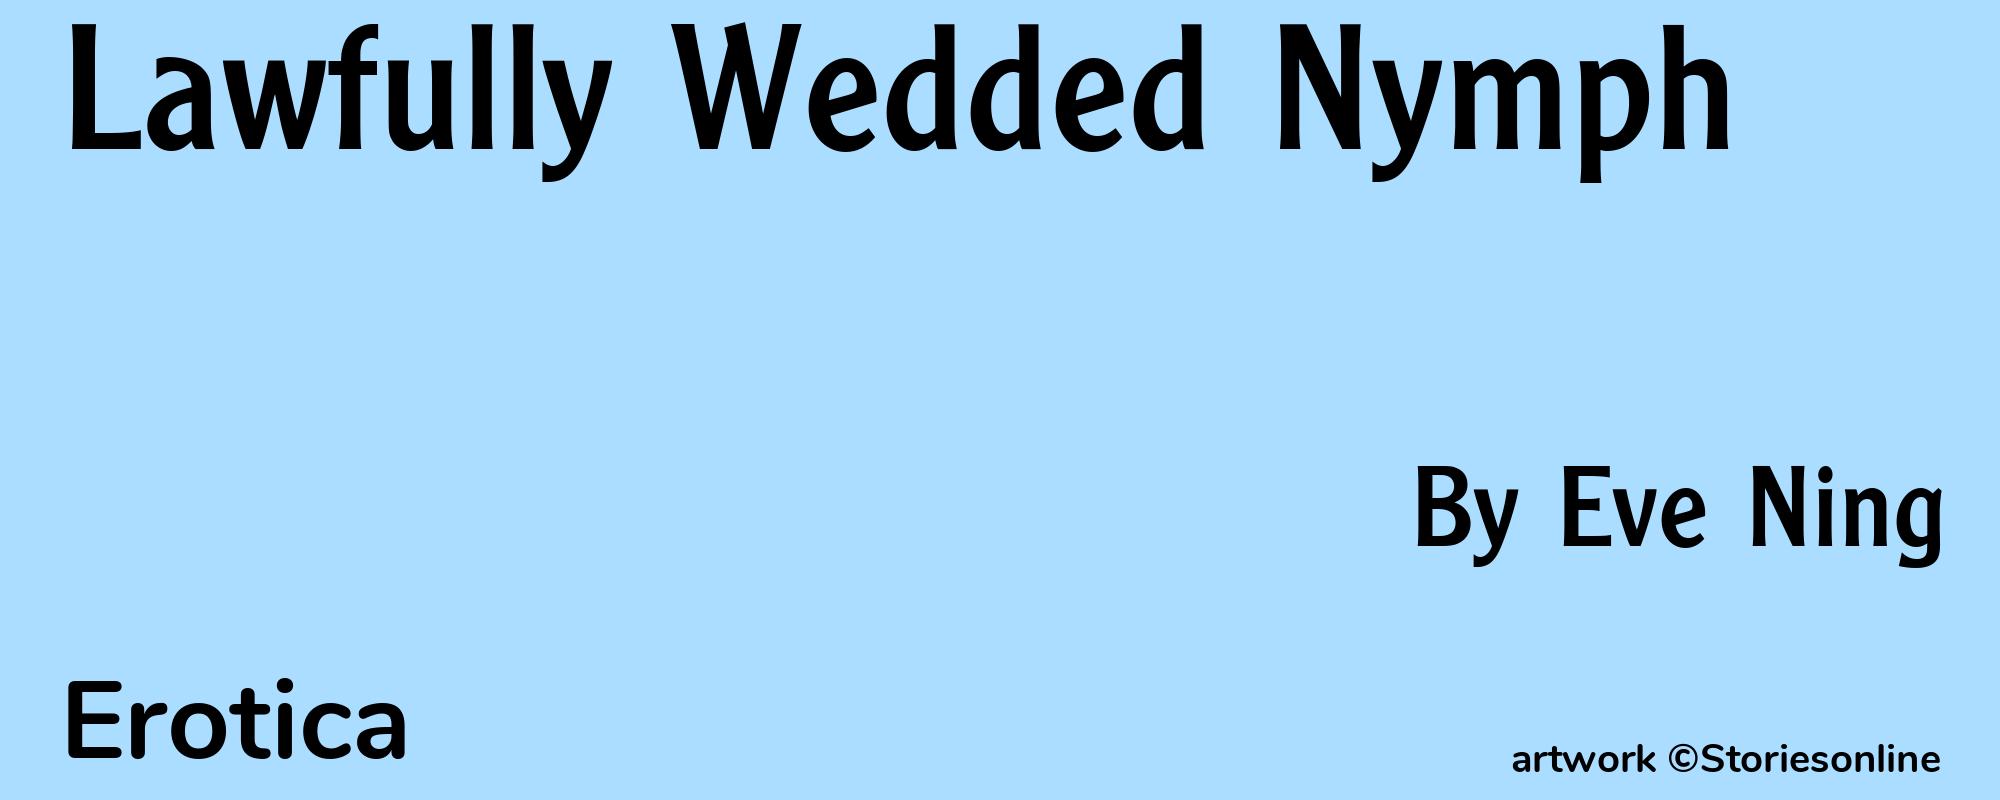 Lawfully Wedded Nymph - Cover